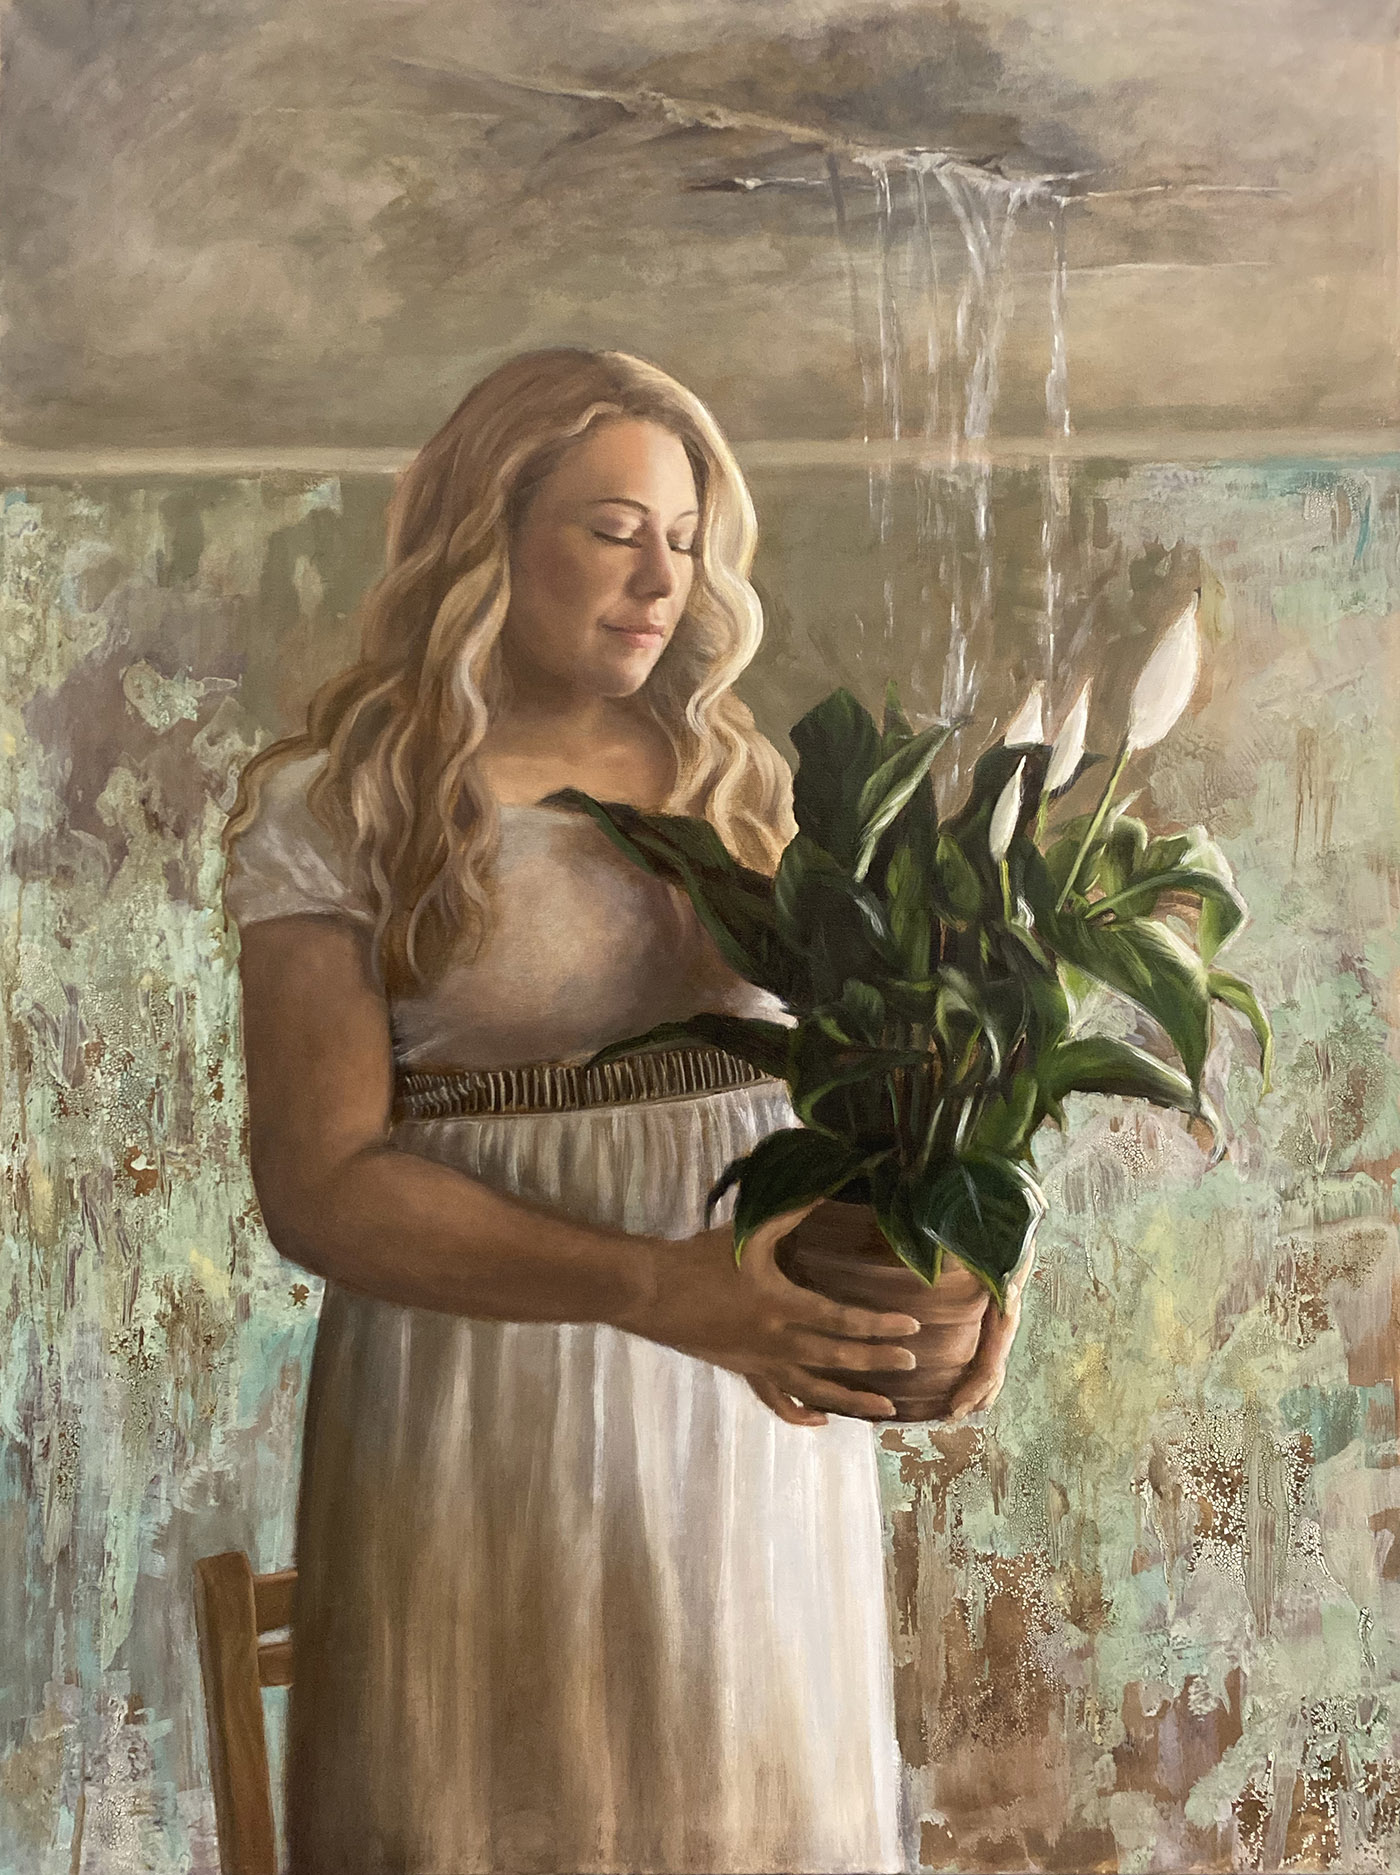 oil painting of woman holding flower pot, water coming down from ceiling